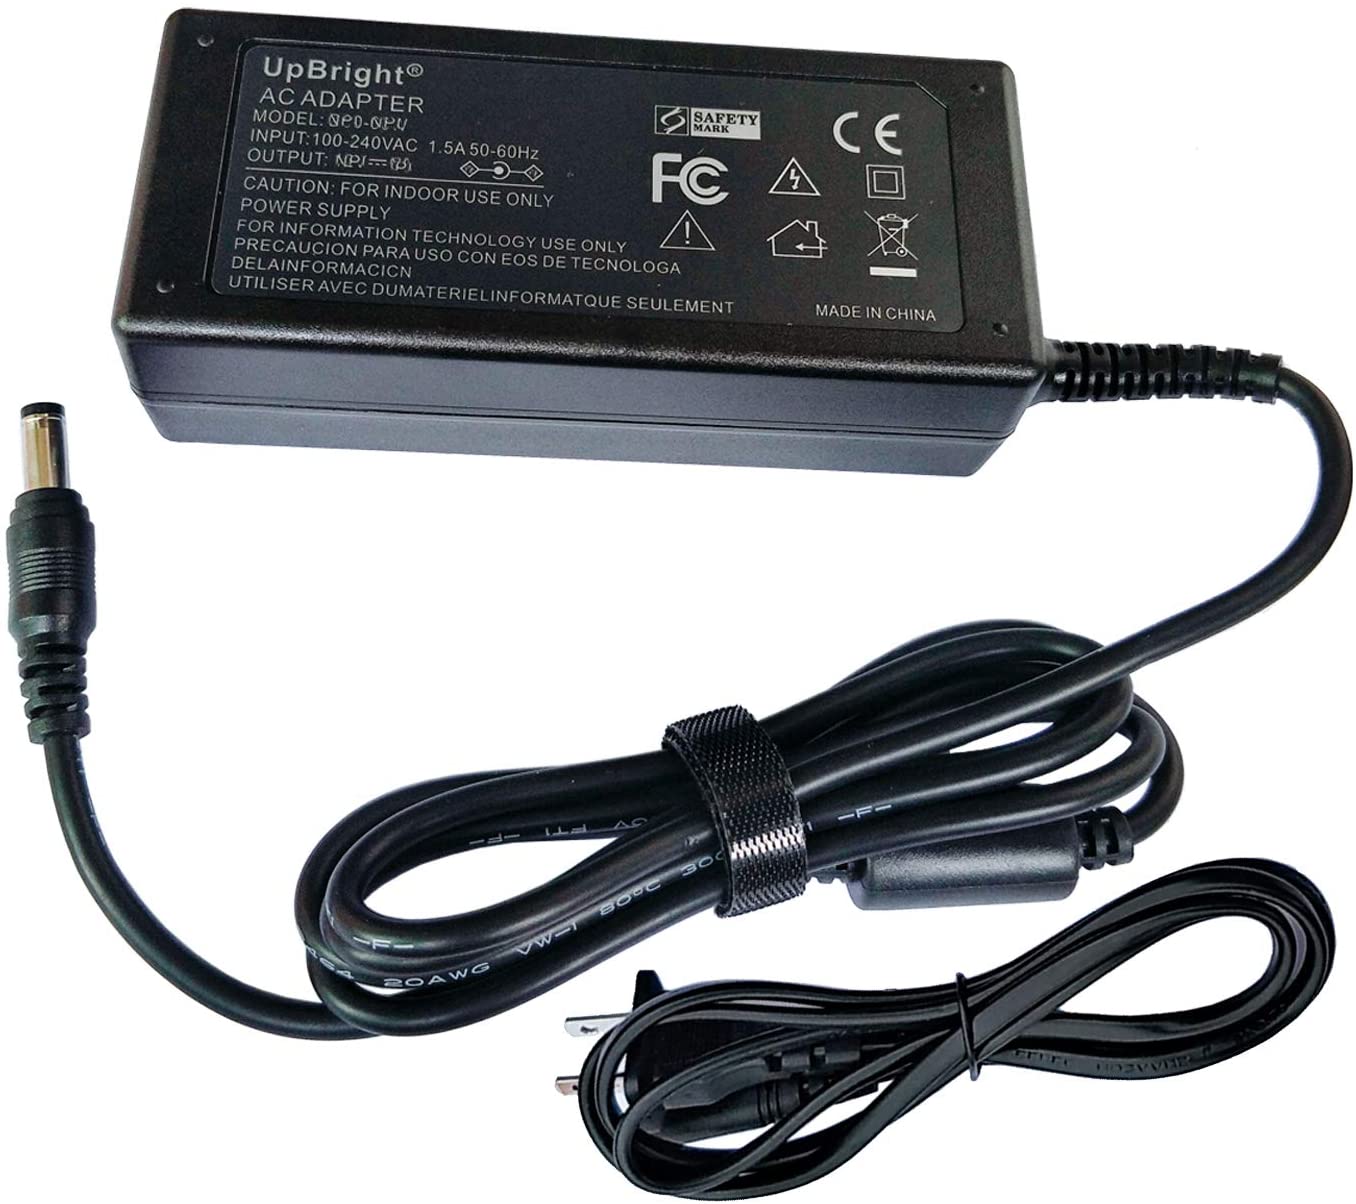 UPBRIGHT NEW Global AC / DC Adapter For QNAP TS-253A-4G TS-253A-4G-US TS-253A-8G TS-253A-8G-US Turbo NAS TS-253A TS253A NAS Server Power Supply Cord Cable PS Charger PSU - image 1 of 5